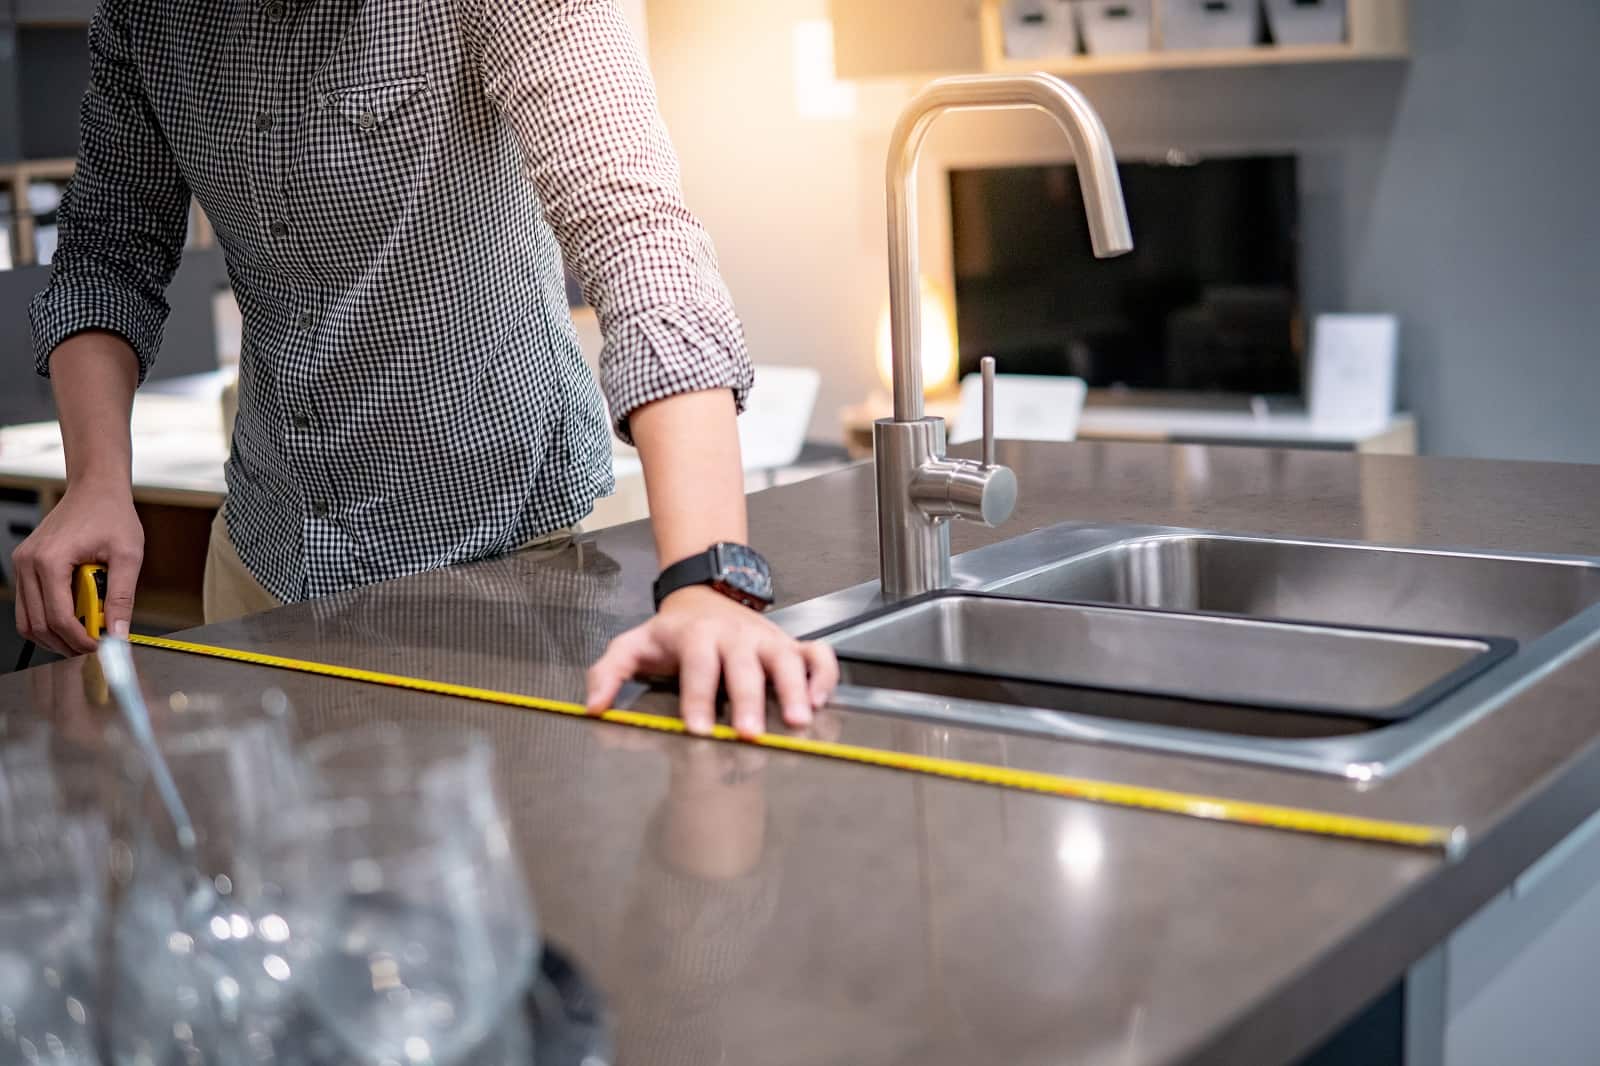 A Homeowner’s Guide To Installing New Kitchen Countertops. Measuring the counter with the ruler